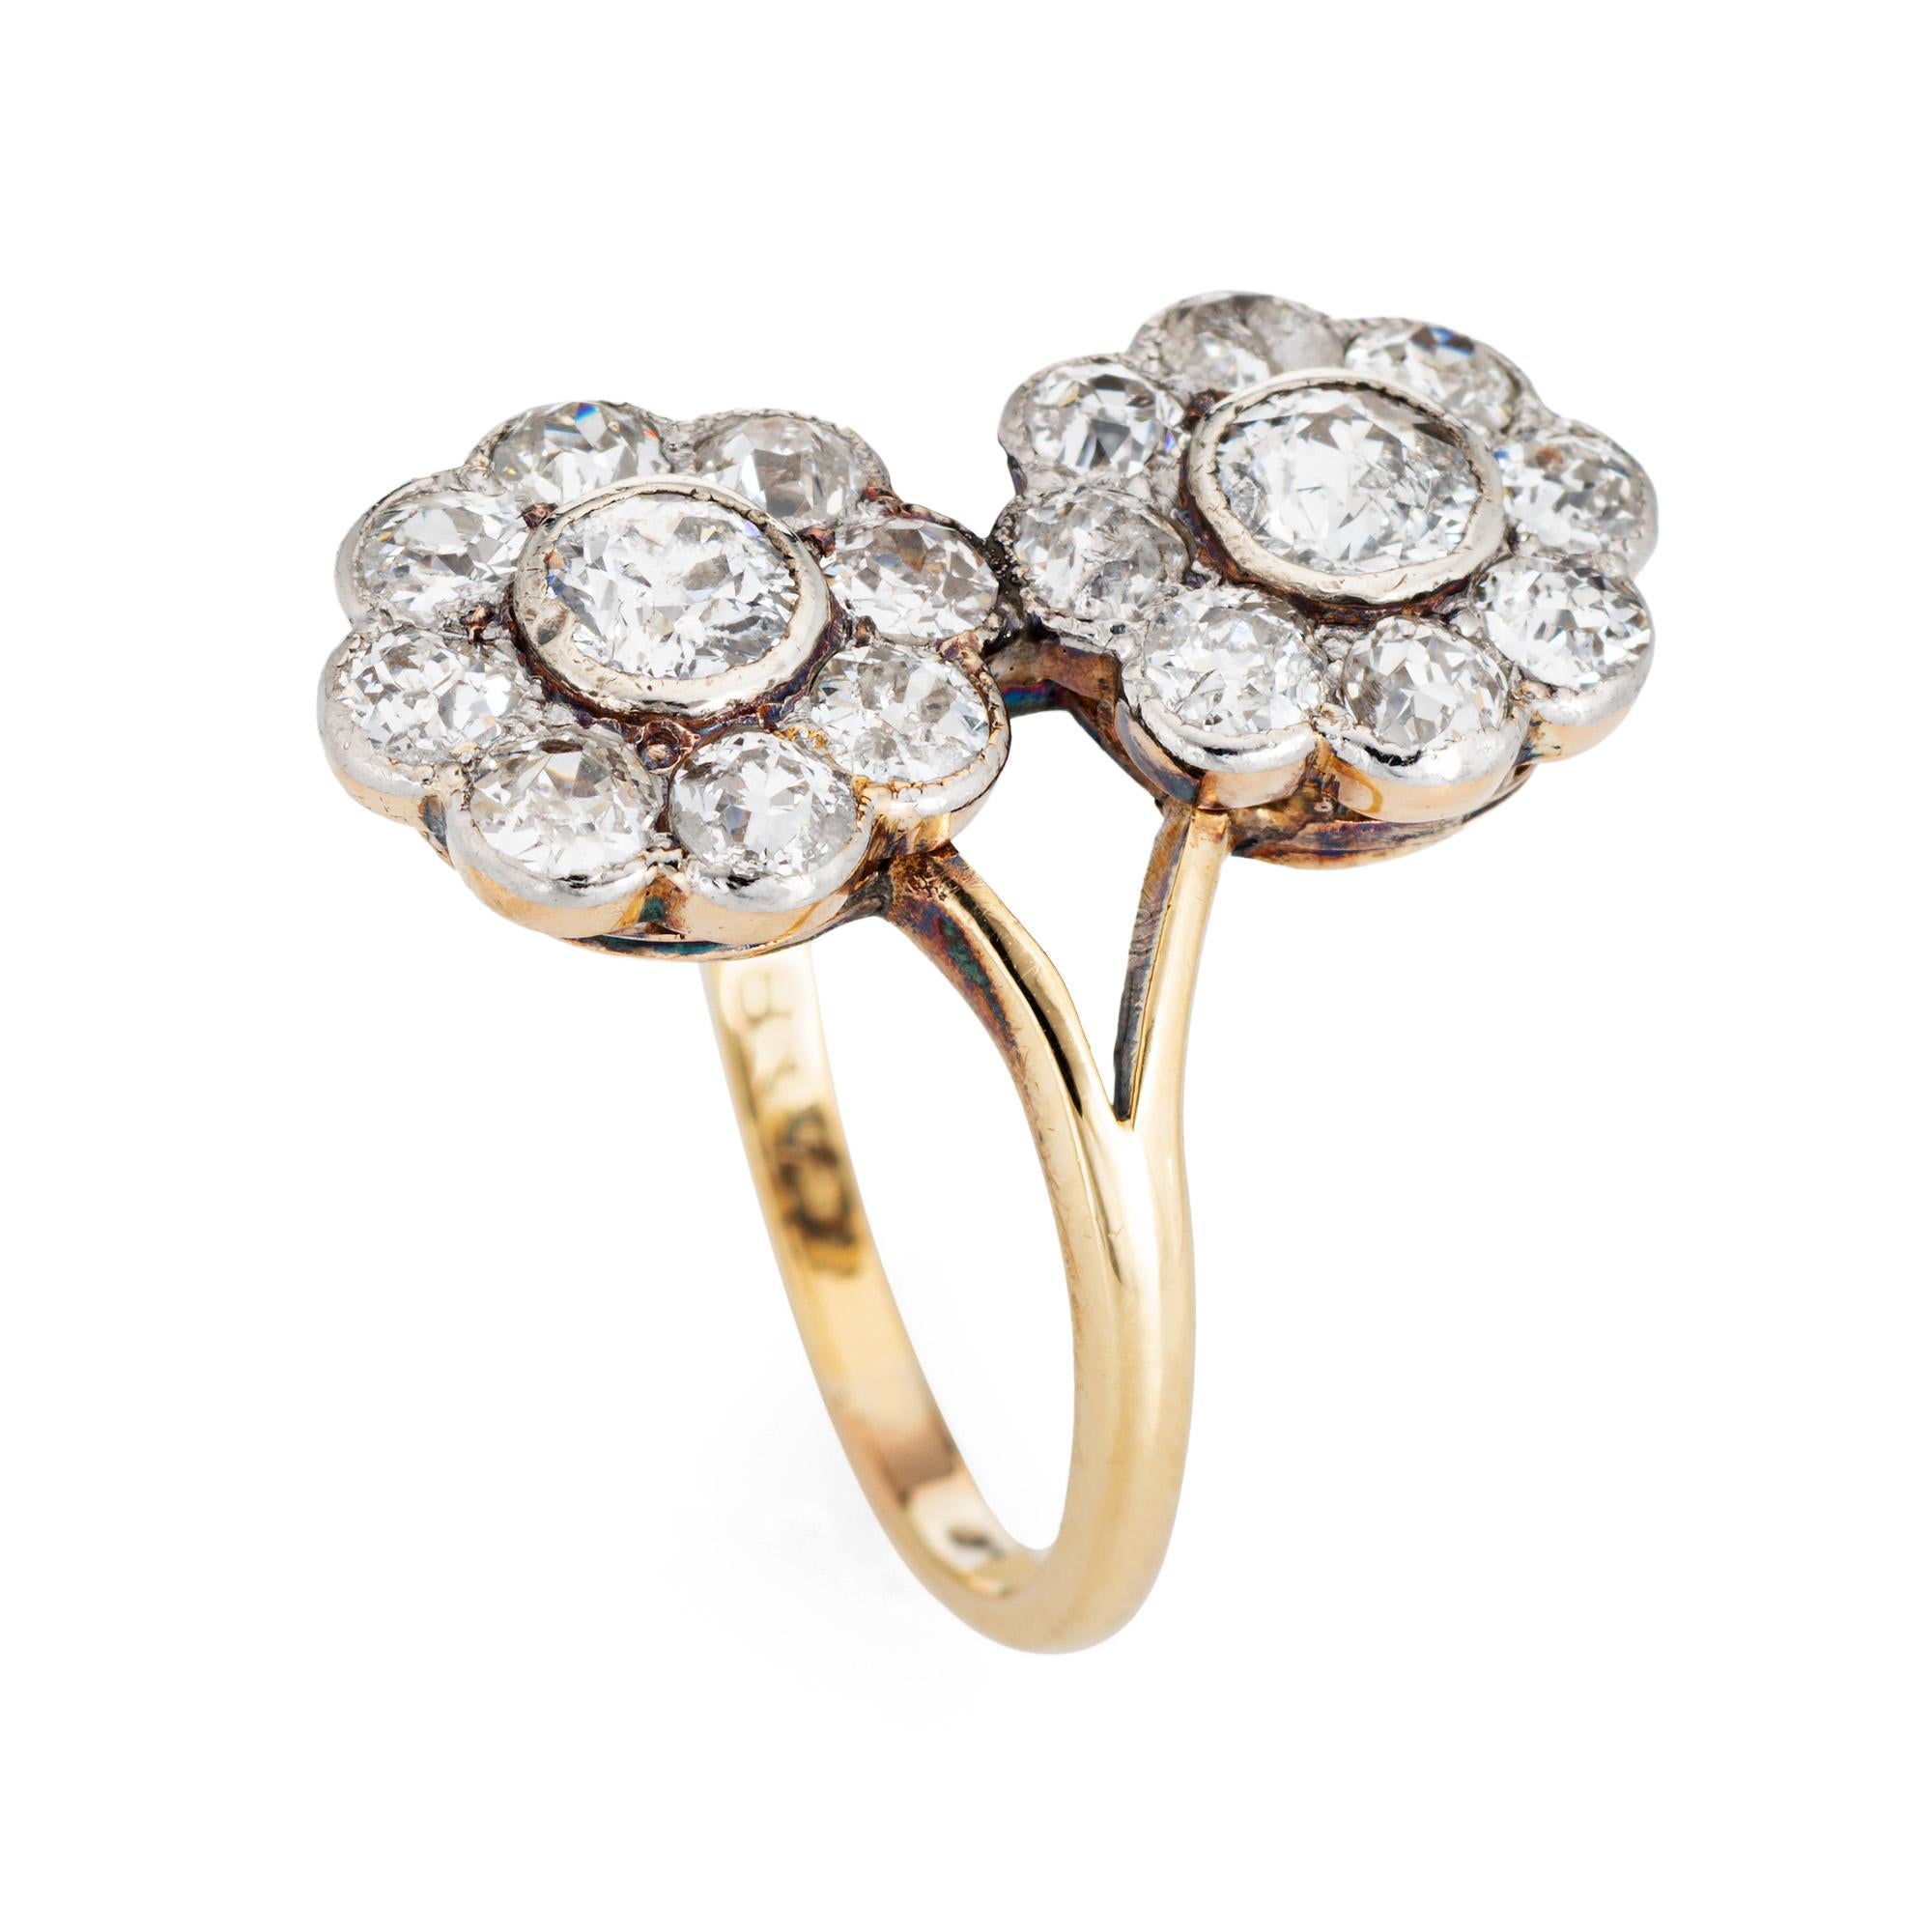 Stylish antique Edwardian diamond double cluster ring (circa 1900s to 1910s) crafted in 14 karat yellow gold and 900 platinum. 

Two center set old mine cut diamonds are estimated at 0.30 carats each, surrounded with a further 16 estimated 0.10